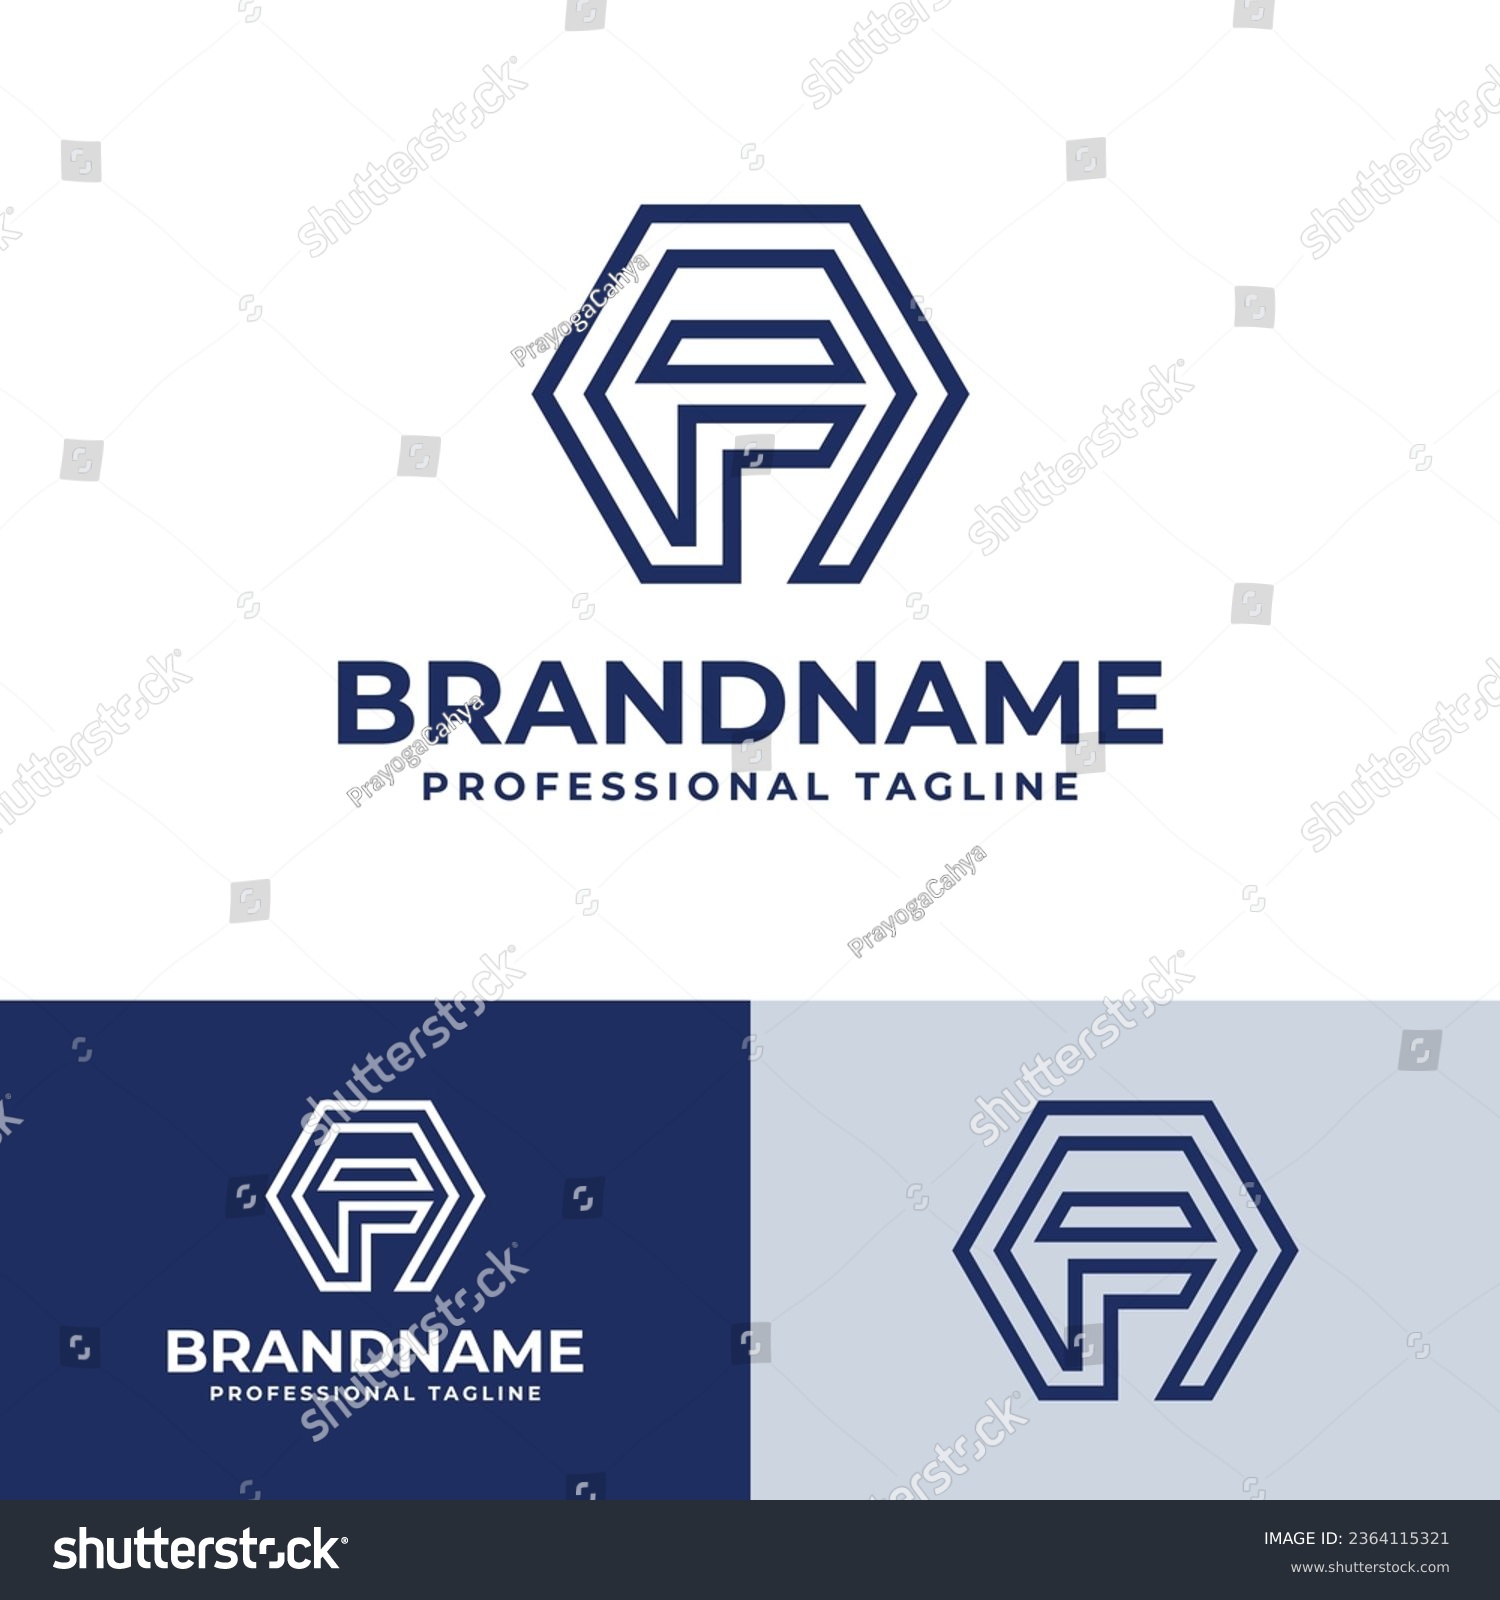 SVG of Letter AF Hexagonal Logo, suitable for any business related to Hexagonal with AF or FA initial. svg